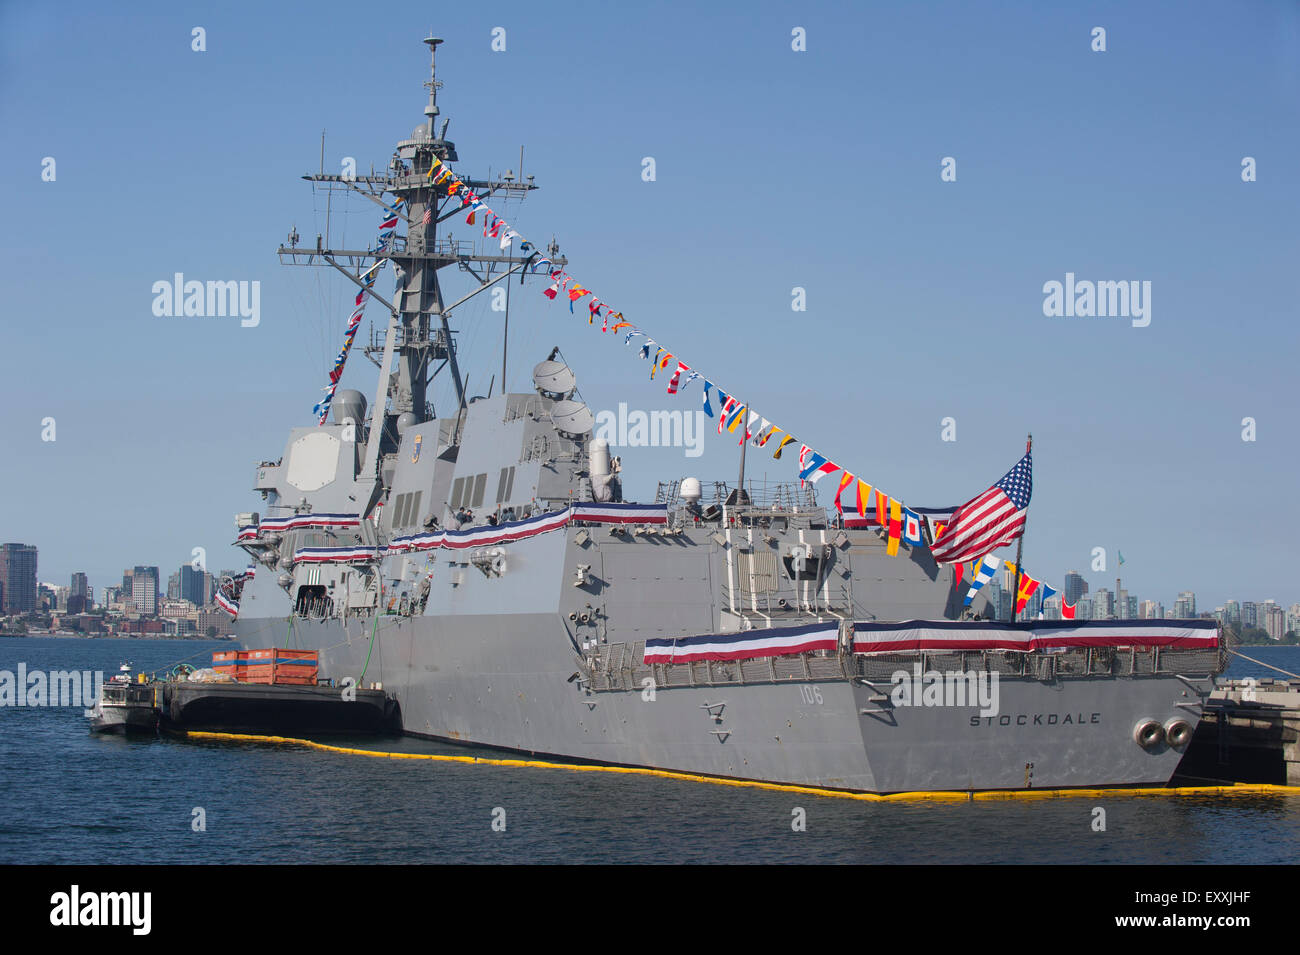 United States Arleigh Burke-class Guided missile destroyer, USS Stockdale (DDG-106) docked in Vancouver harbour Stock Photo